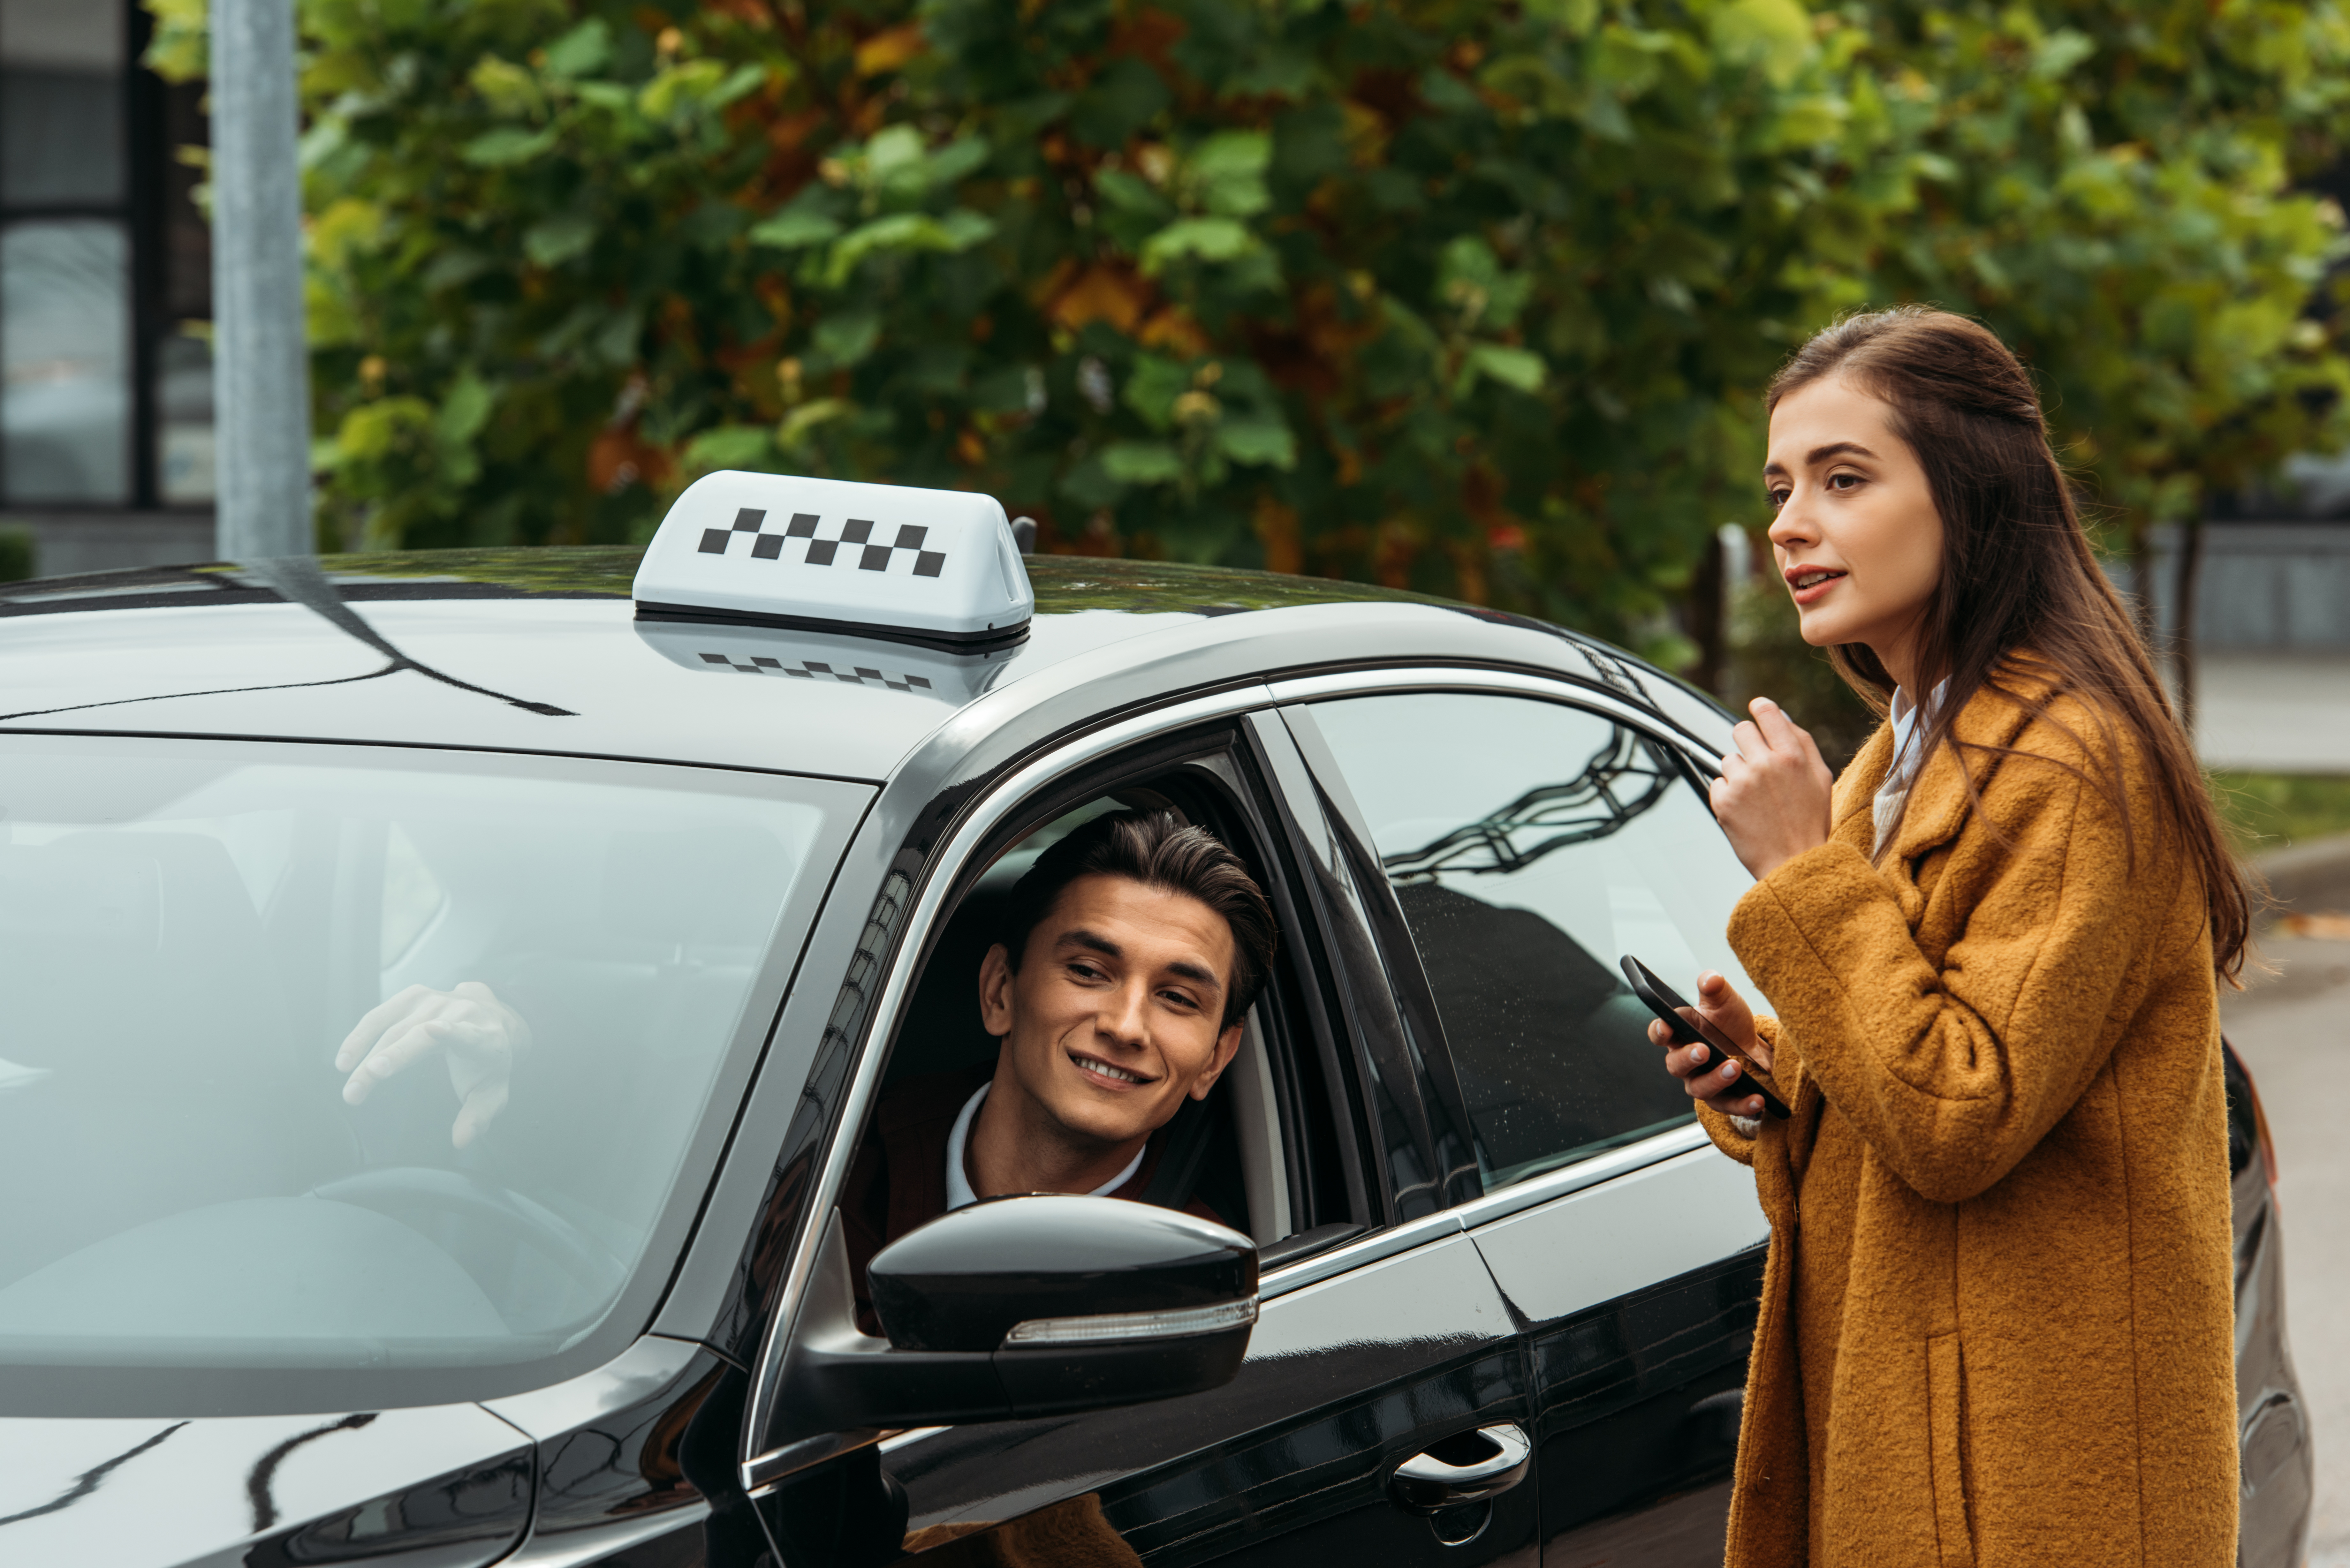 Young woman holding smartphone and talking to smiling taxi driver